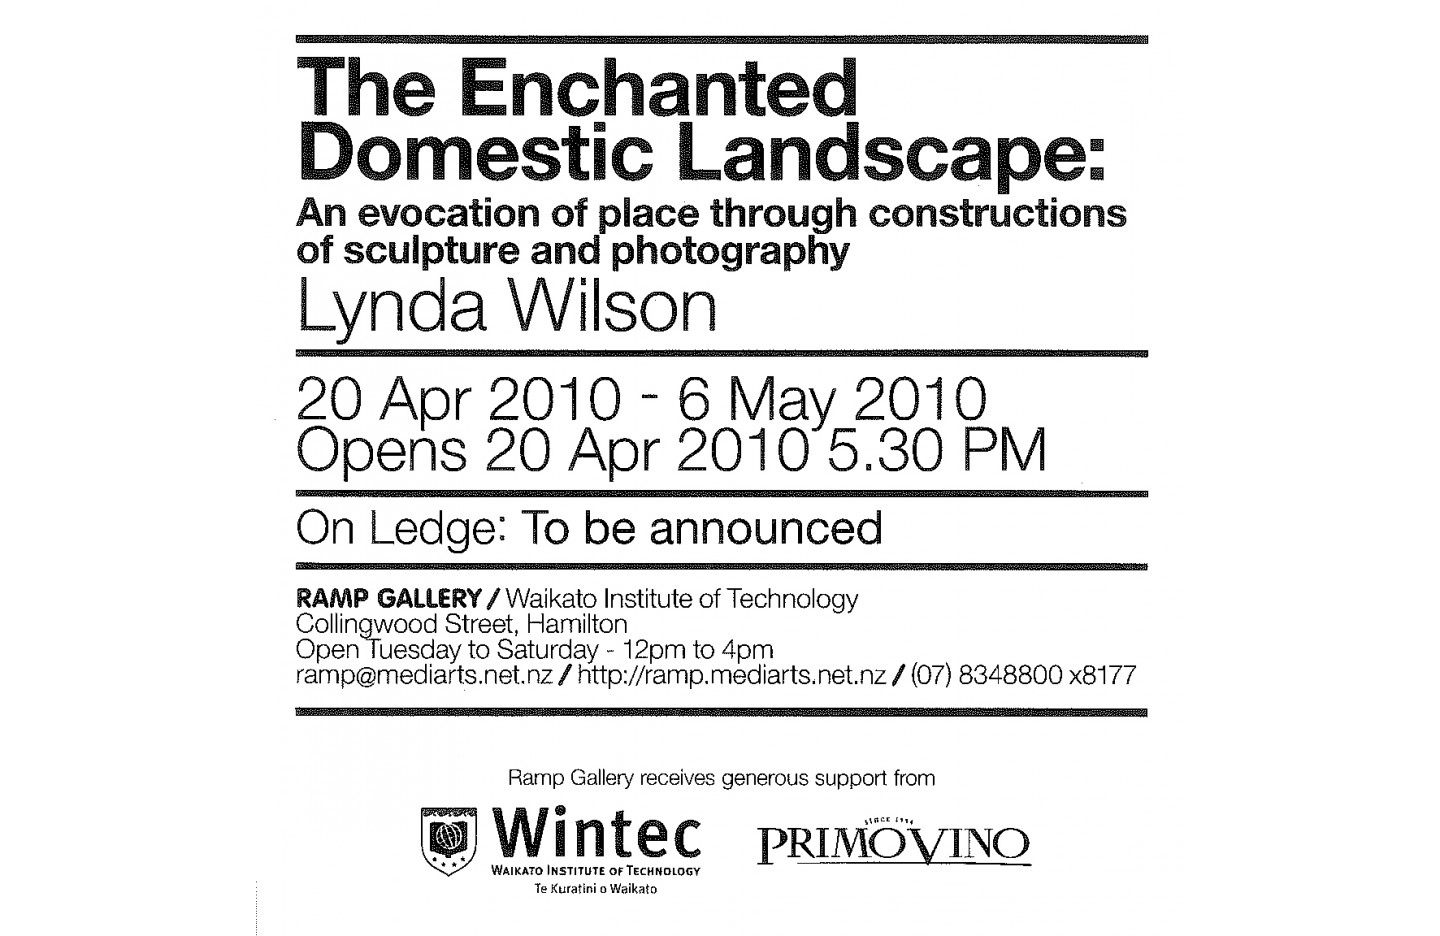 The enchanted domestic landscape, Ramp Gallery (2010)